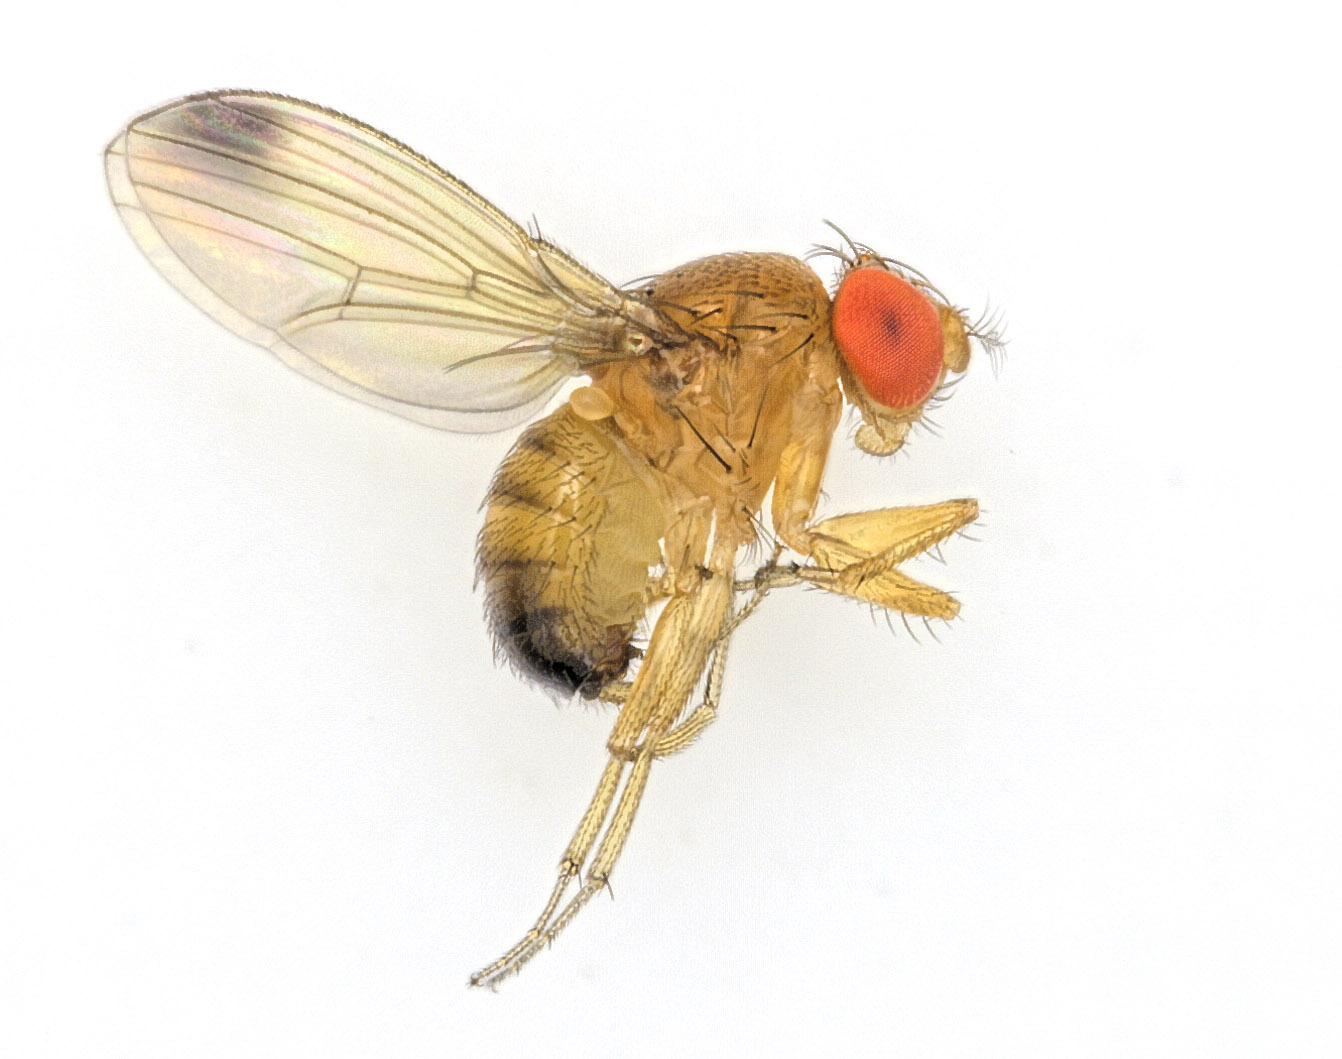 In 2014, the spotted-wing drosophila vinegar fly, Drosophila suzukii, caused massive crop failures to cherries, raspberries, plums and grapes in many parts of Central Europe.